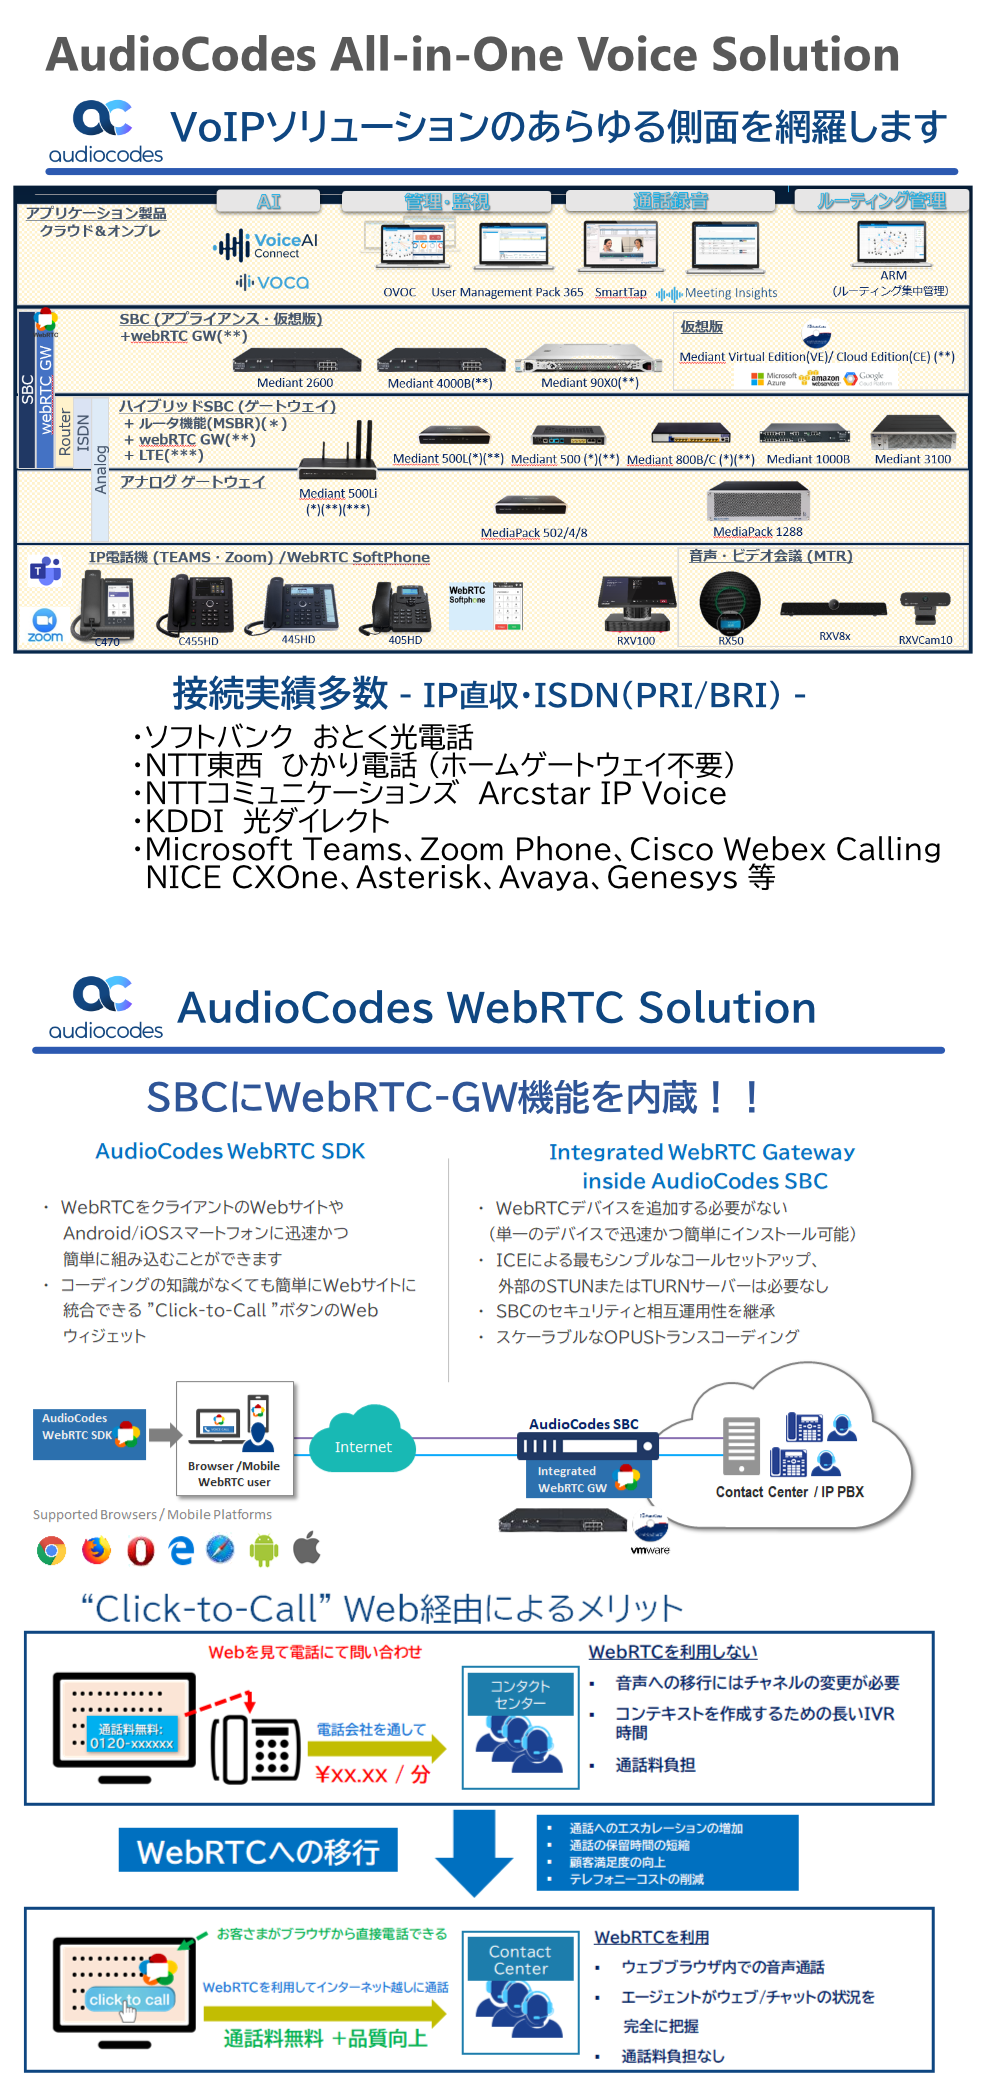 Audiocodes_1page_ver3_cut.png